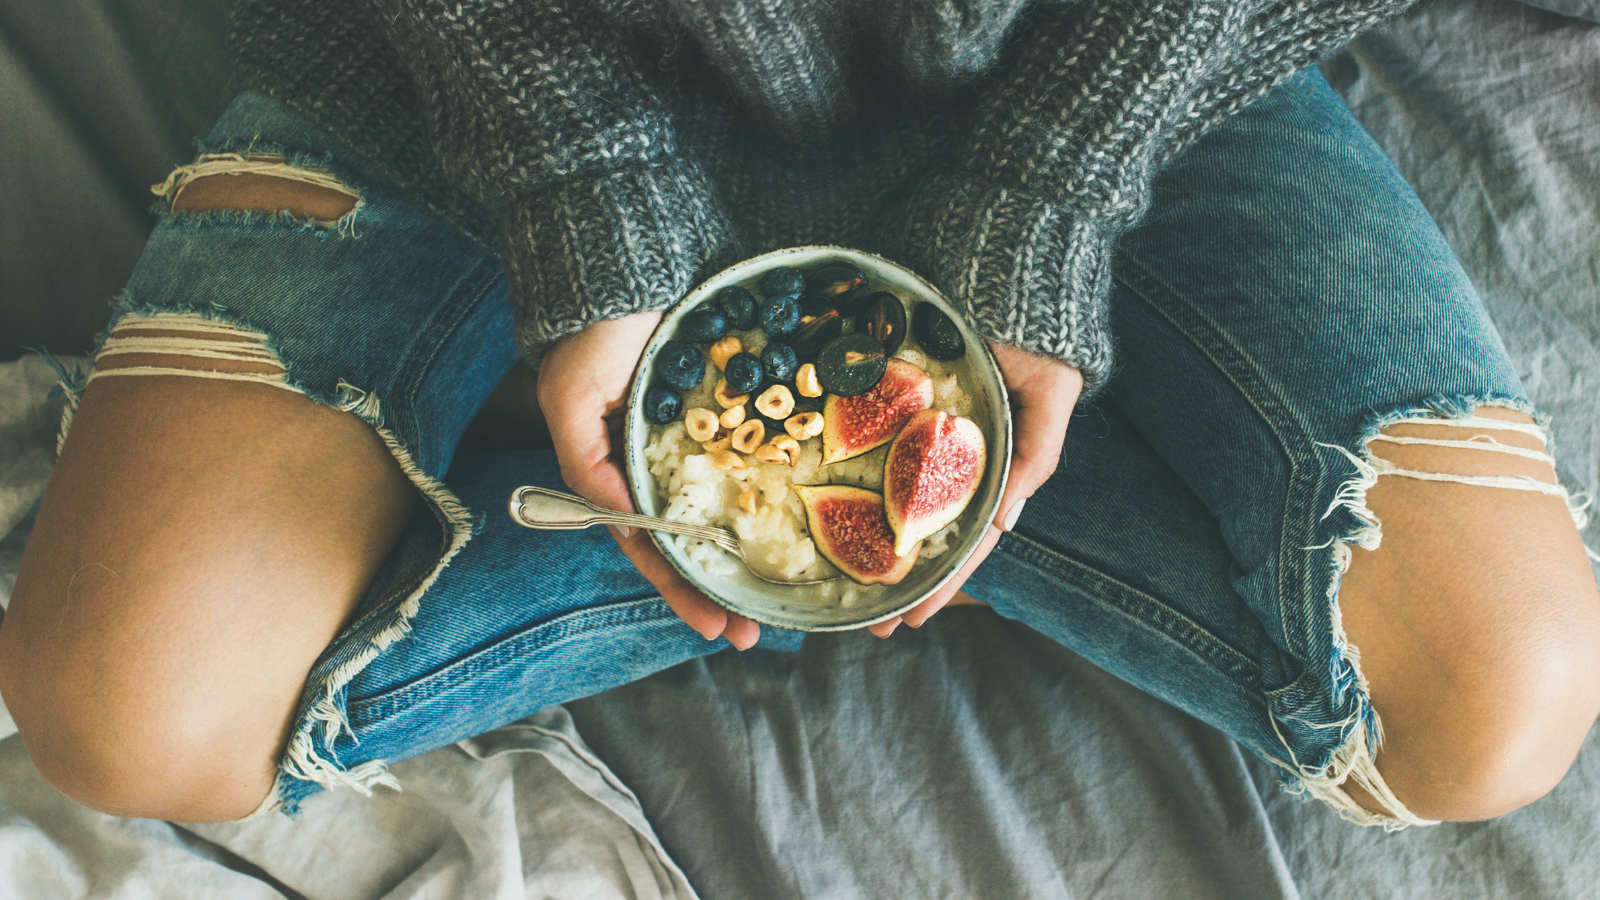 Healthy winter breakfast in bed. Woman in sweater and jeans holding rice coconut porridge with figs, berries, hazelnuts to enhance heart health